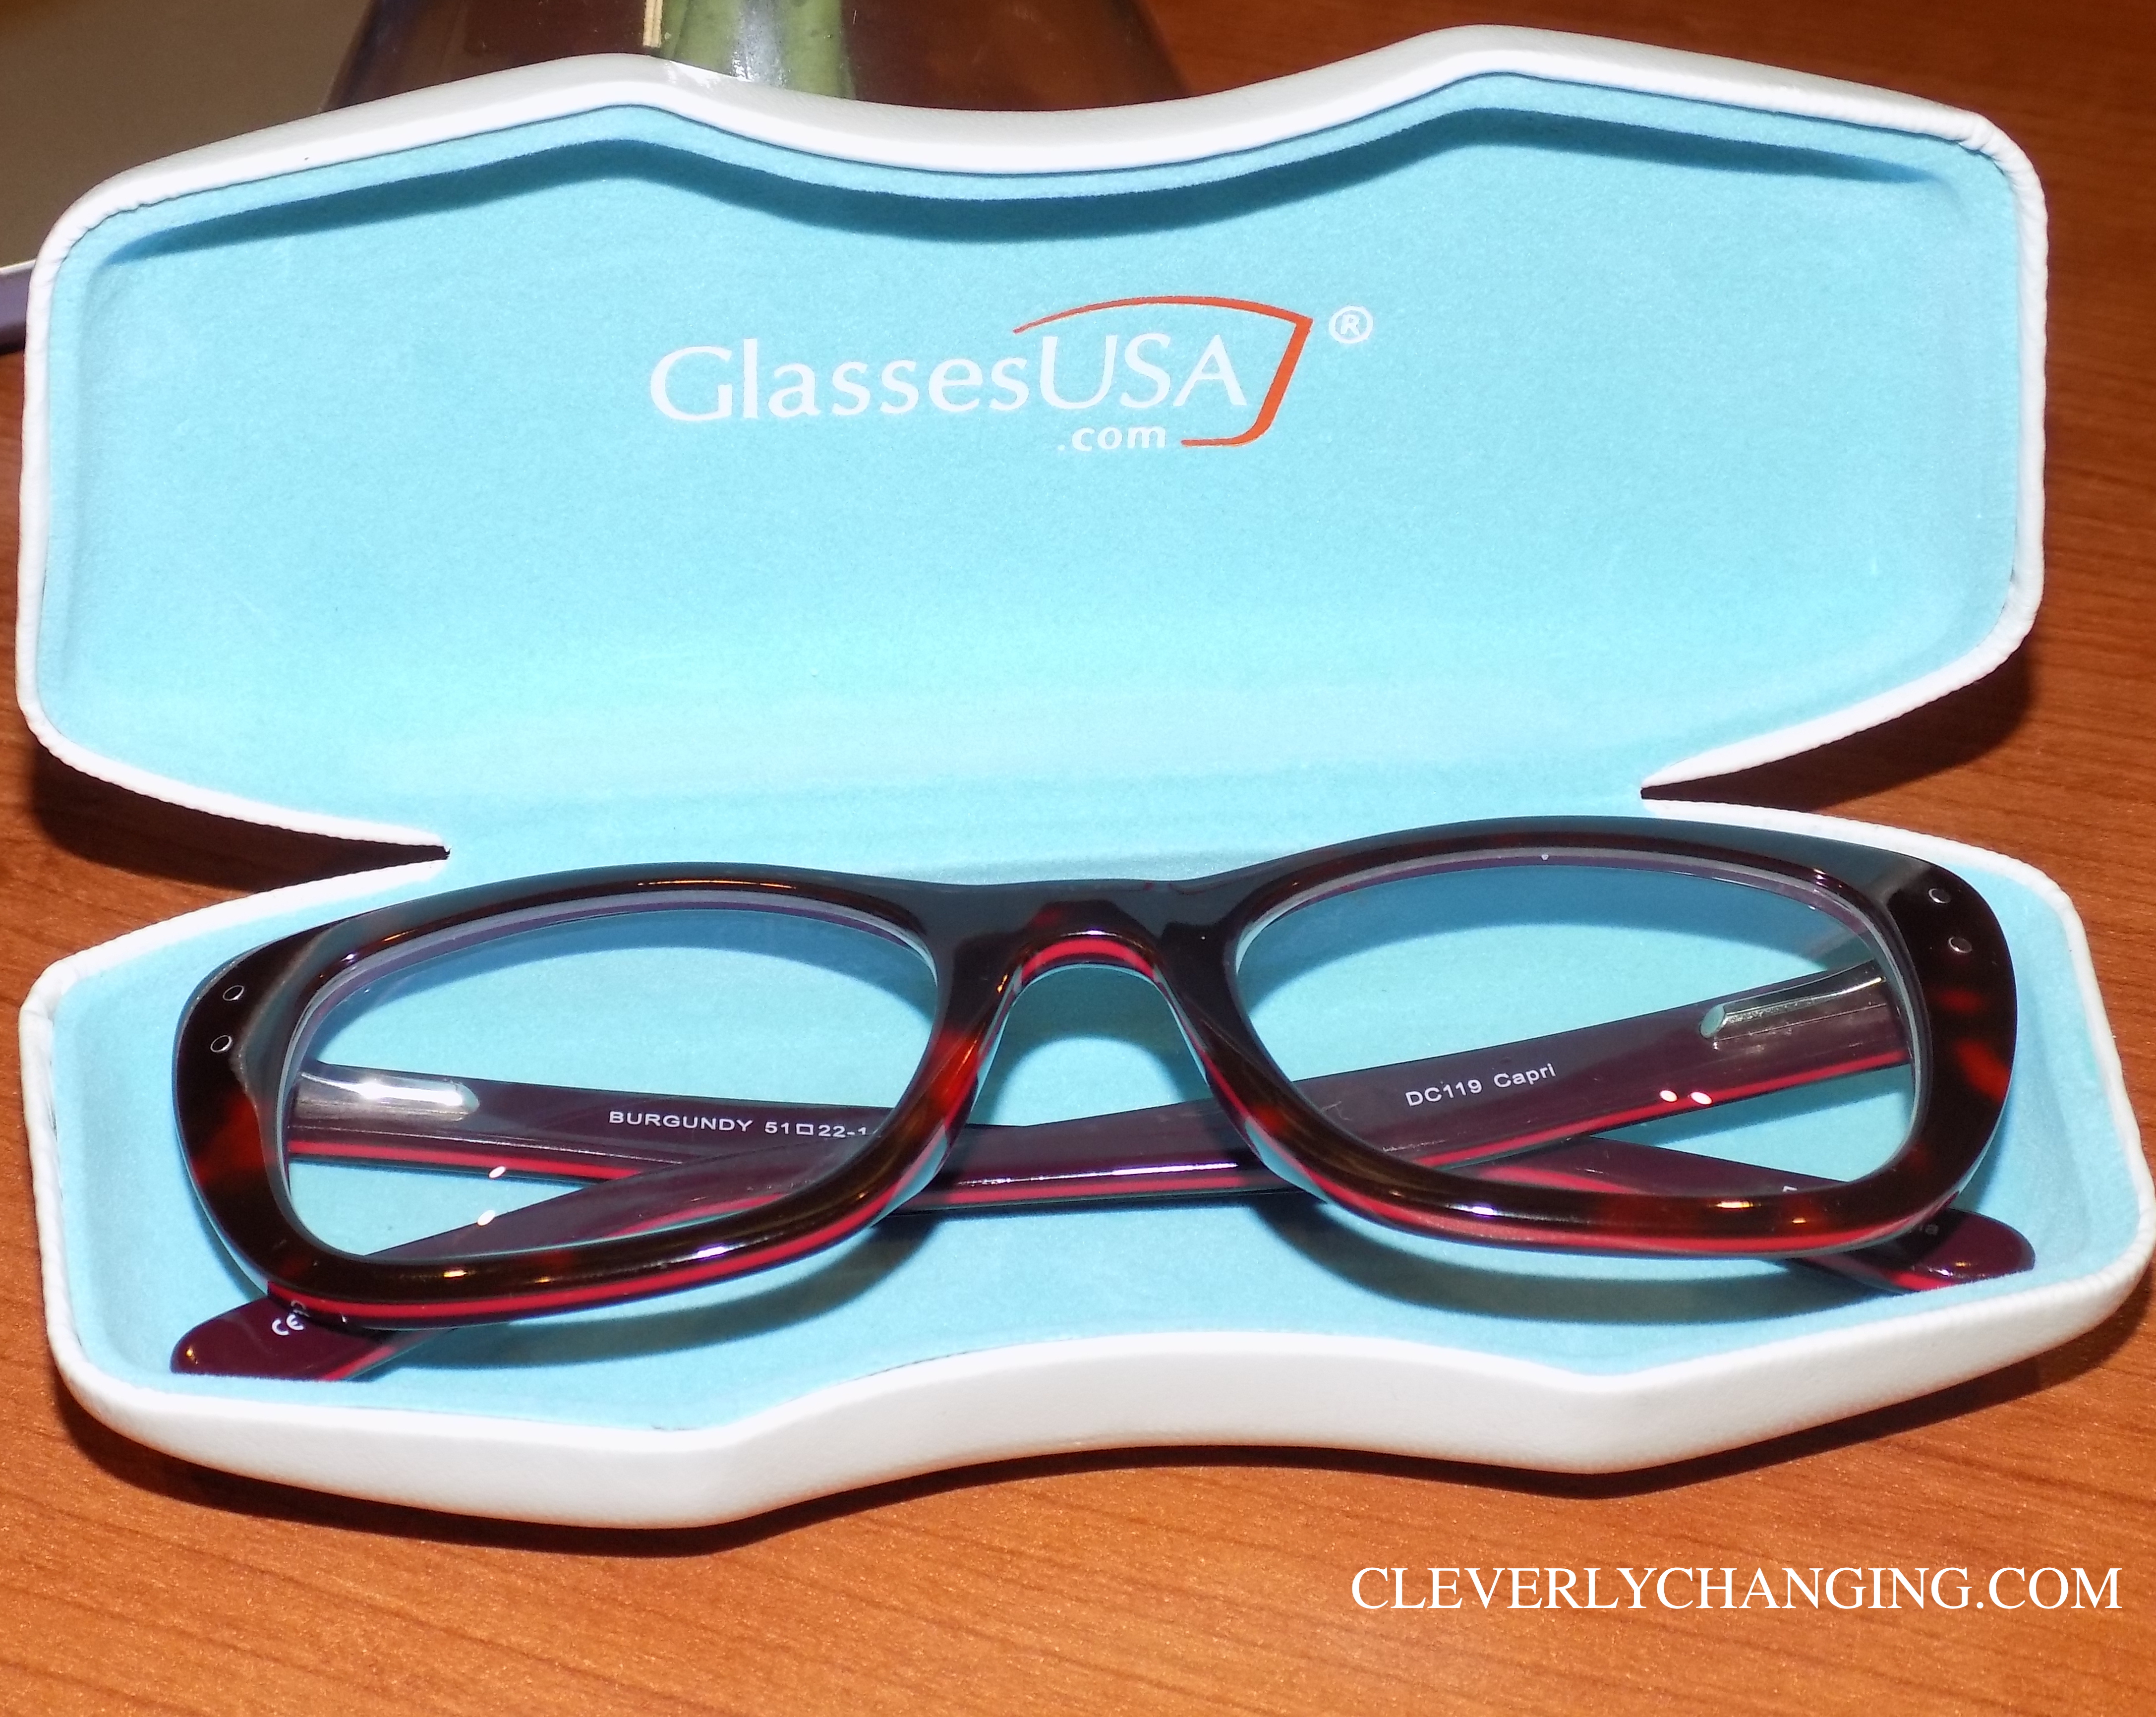 Review: GlassesUSA - Ordering Glasses Online - Cleverly ...
